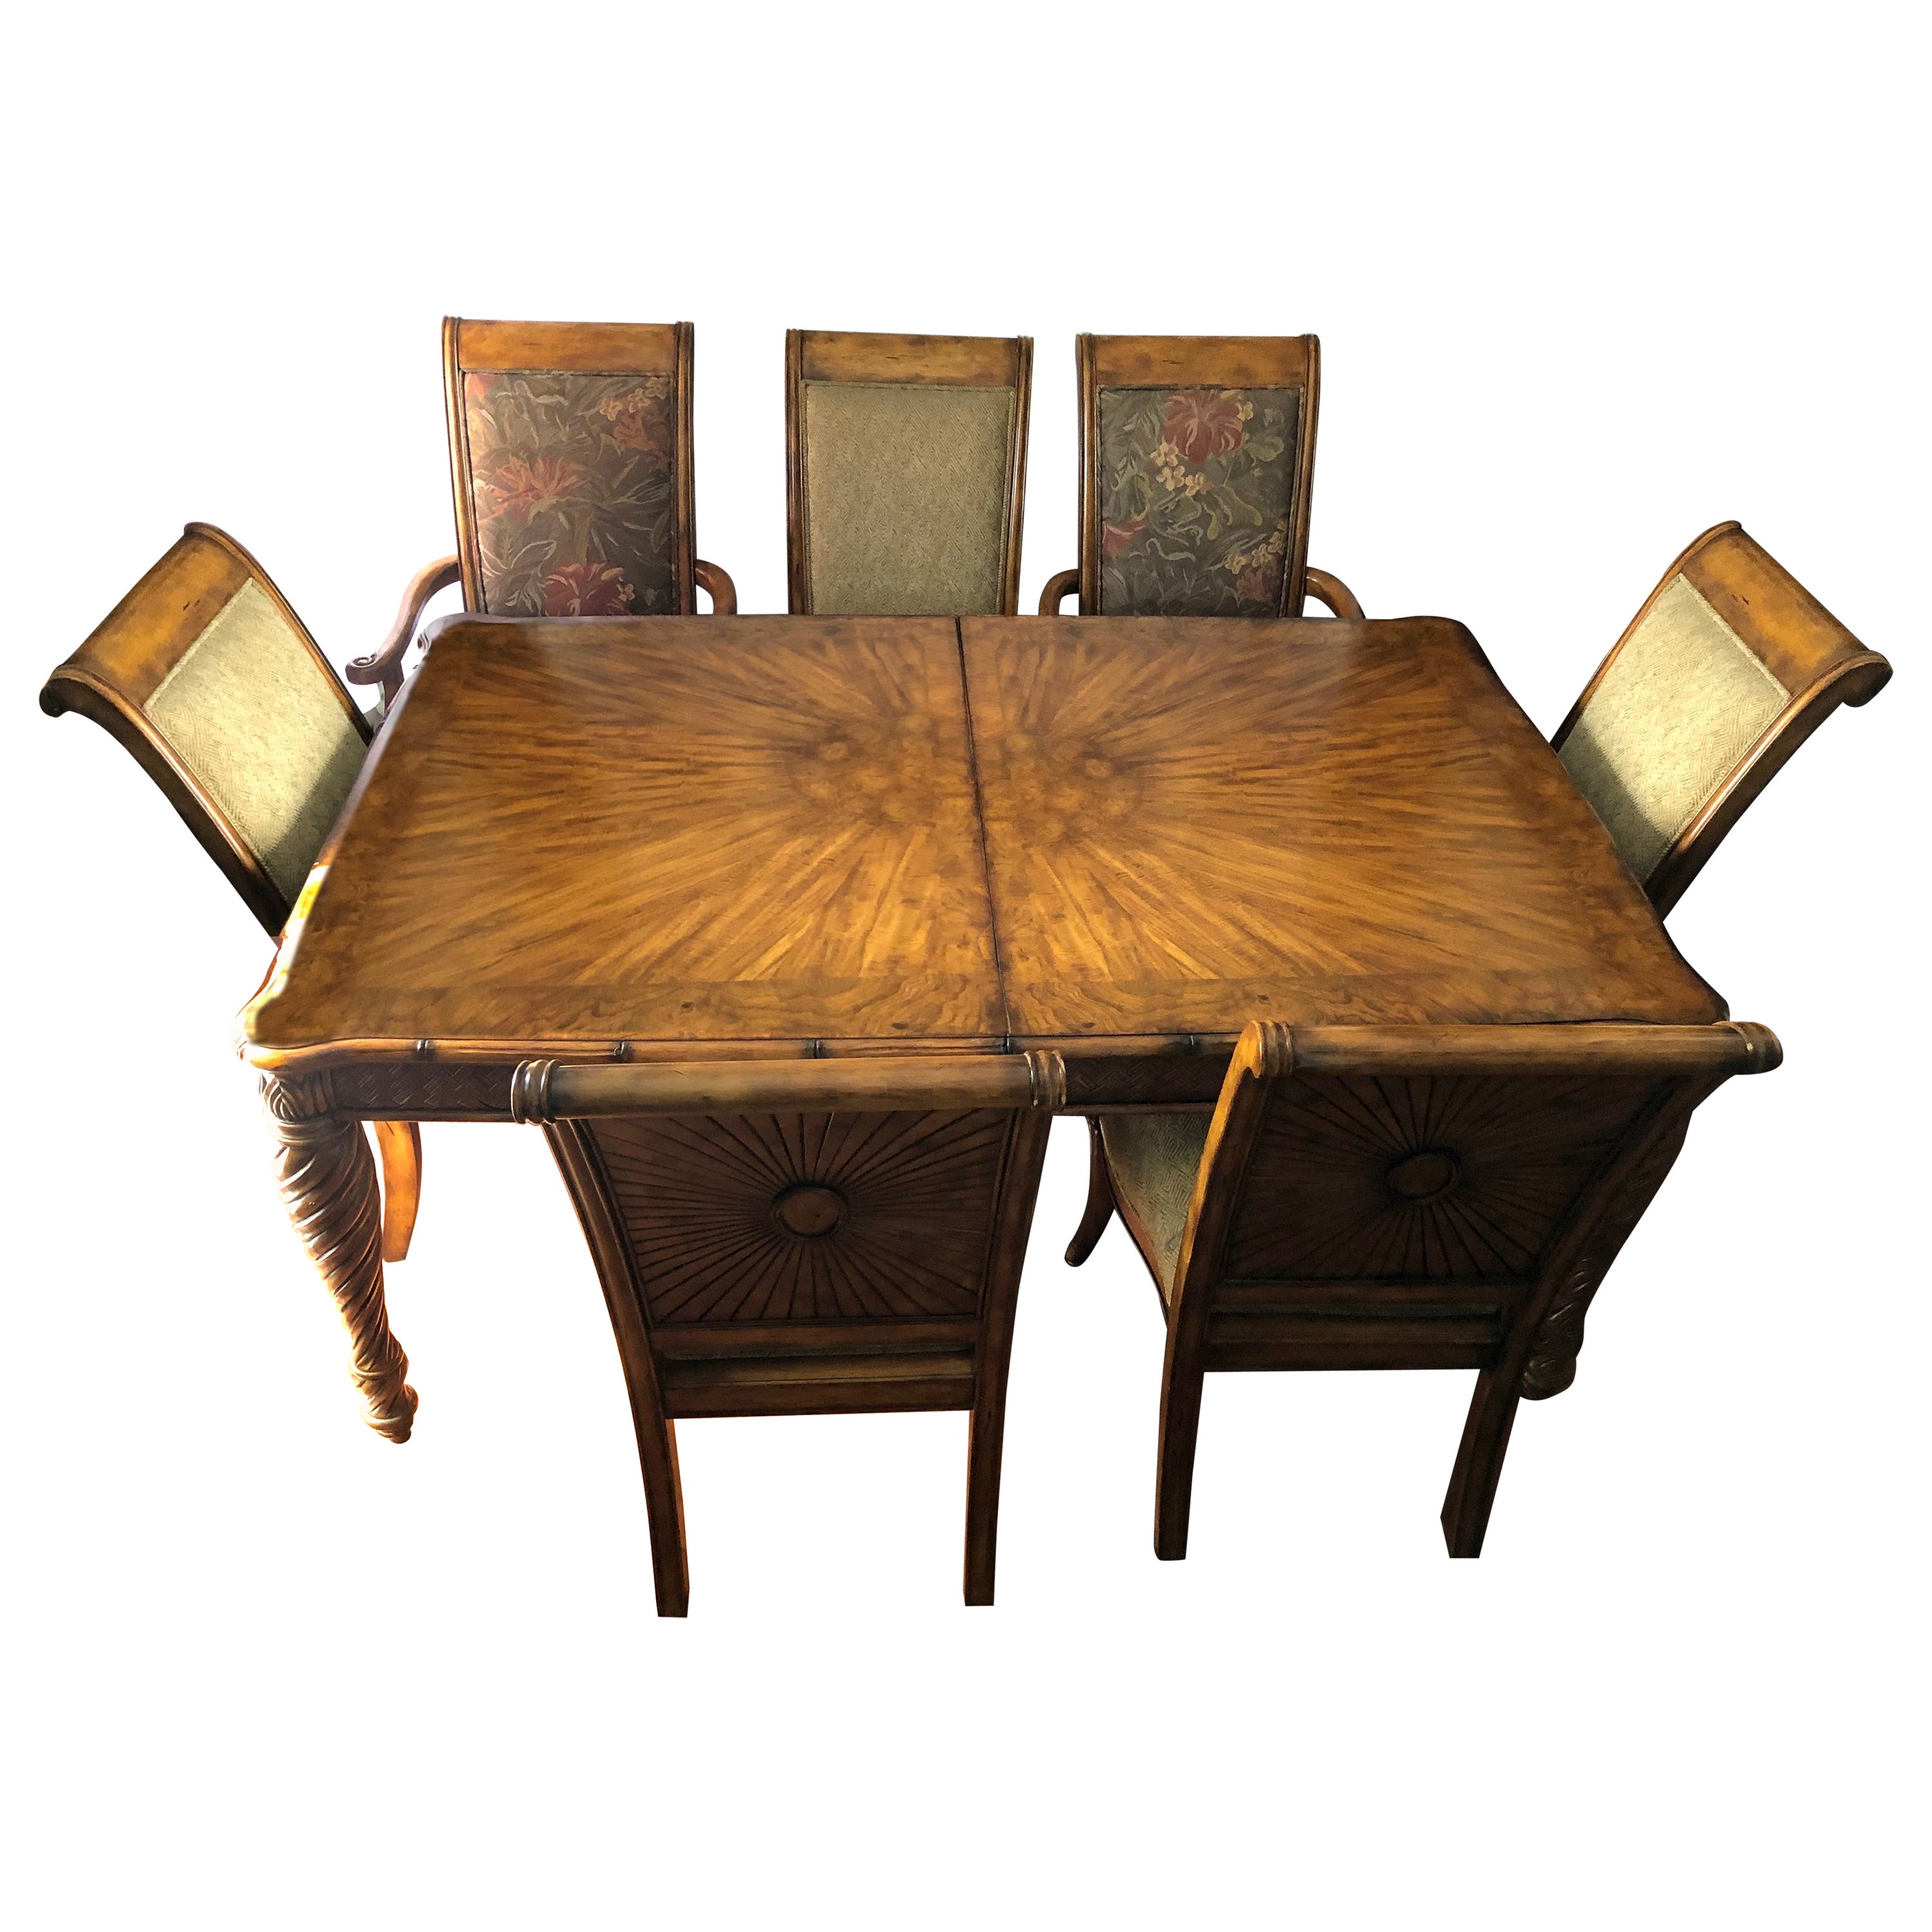 Schnadig William IV Dining Room Set 8 Chairs Burl Wood Table with 2 Leaves